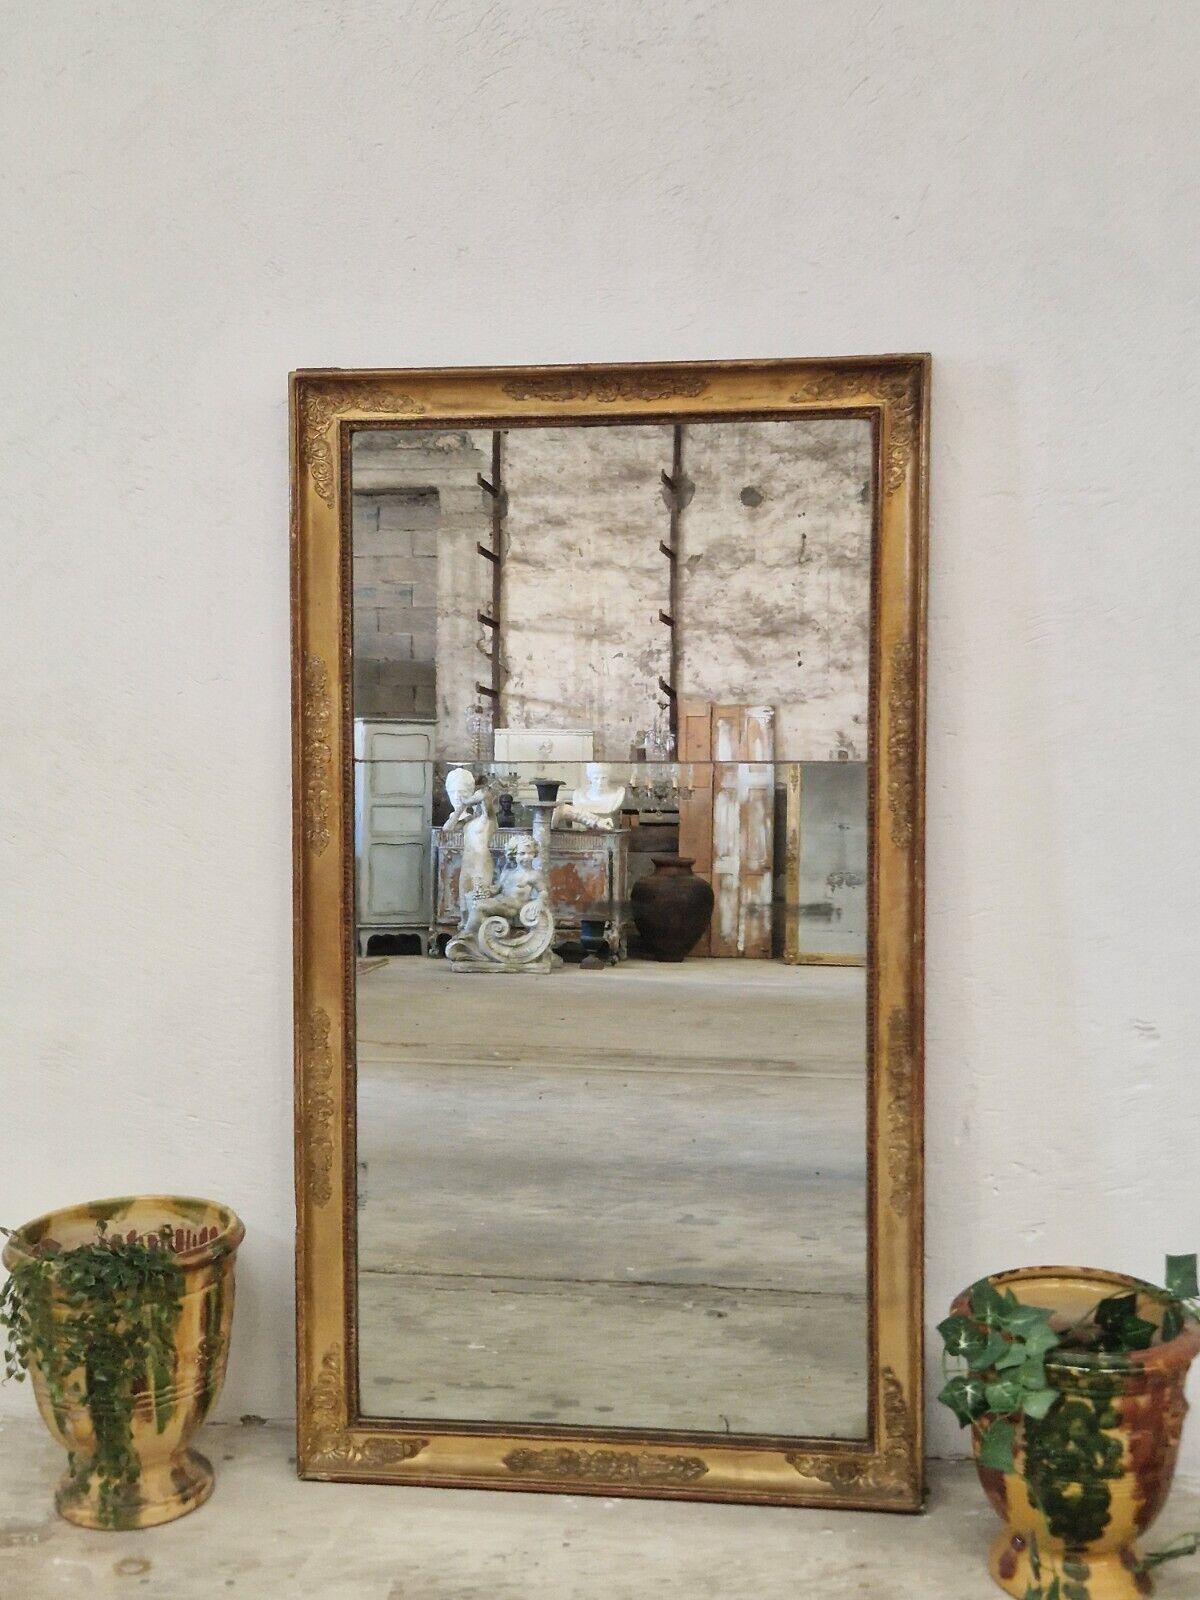 Rocaille Antiques

by French Vintage Interiors

Add a touch of antique elegance to your home decor with this stunning Rocaille wall mirror. Crafted in France before the Victorian era, this original piece boasts a rectangular shape with an angular